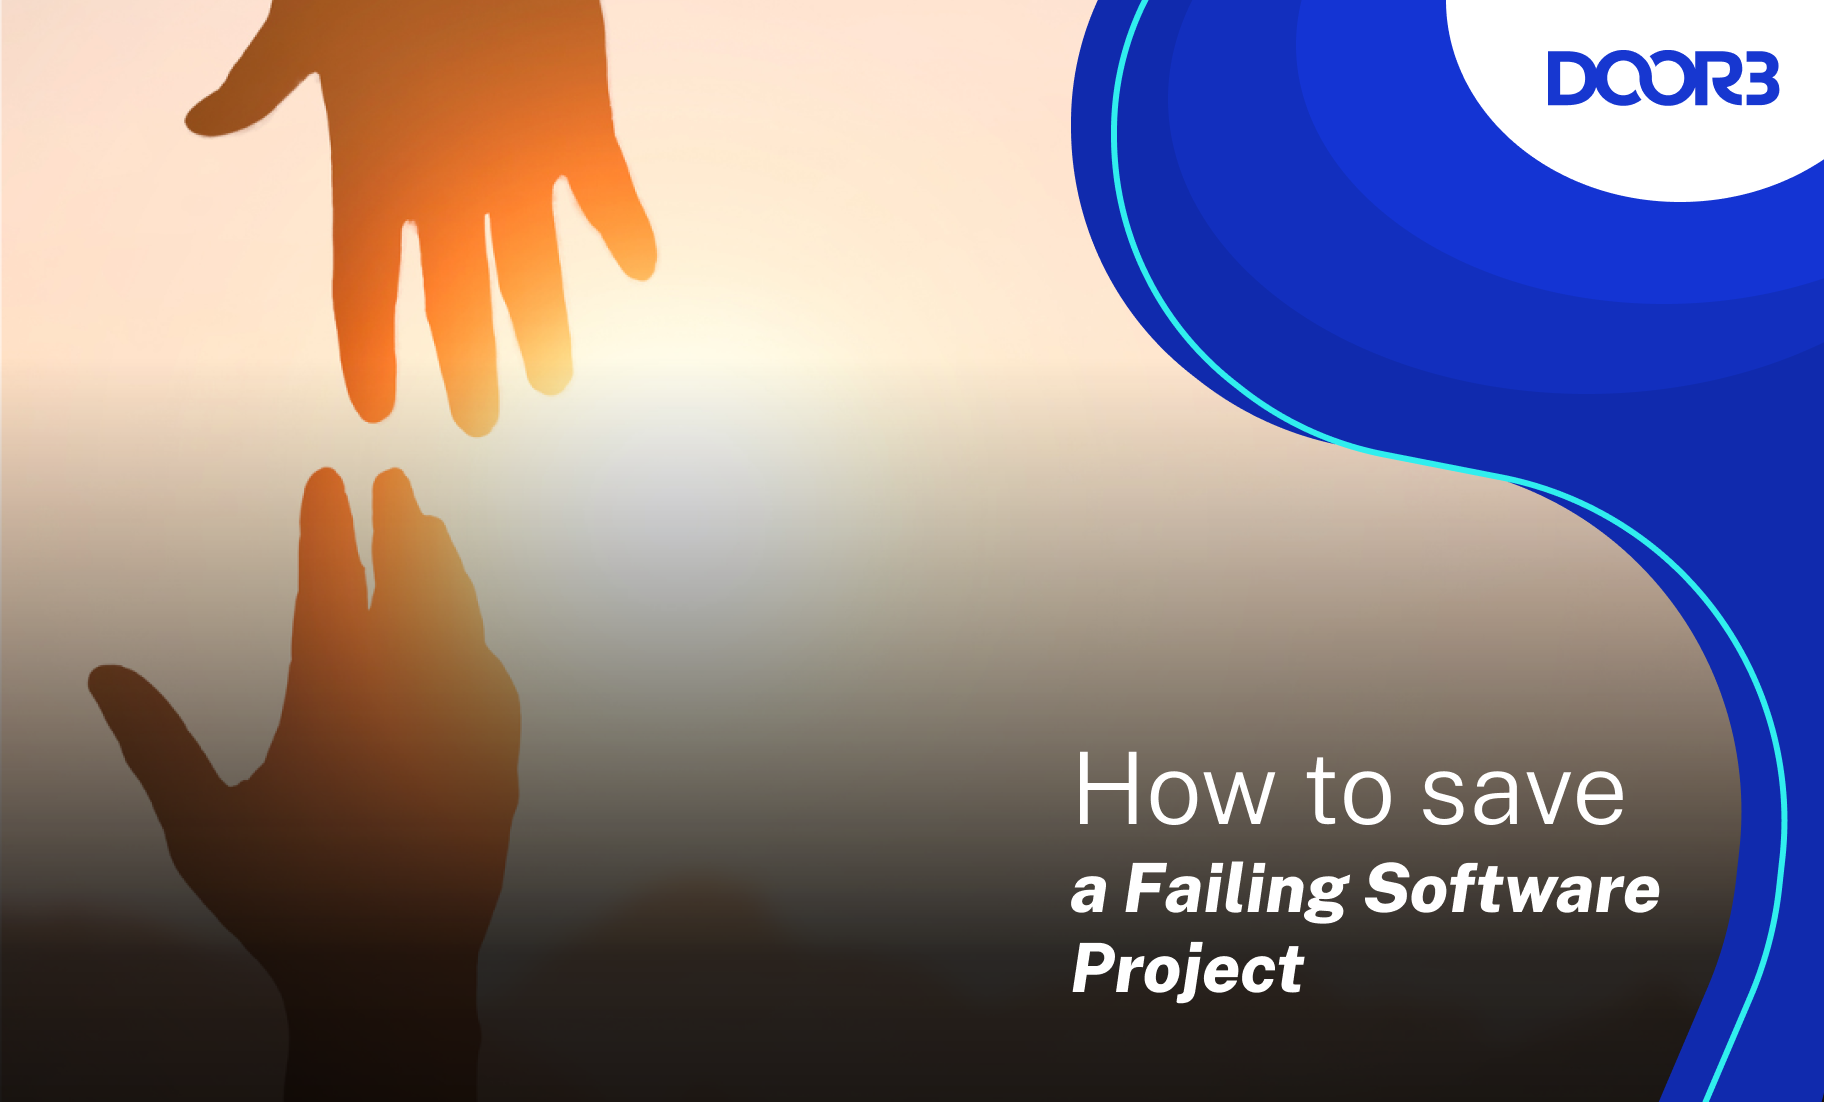 How to Rescue a Failing Software Project